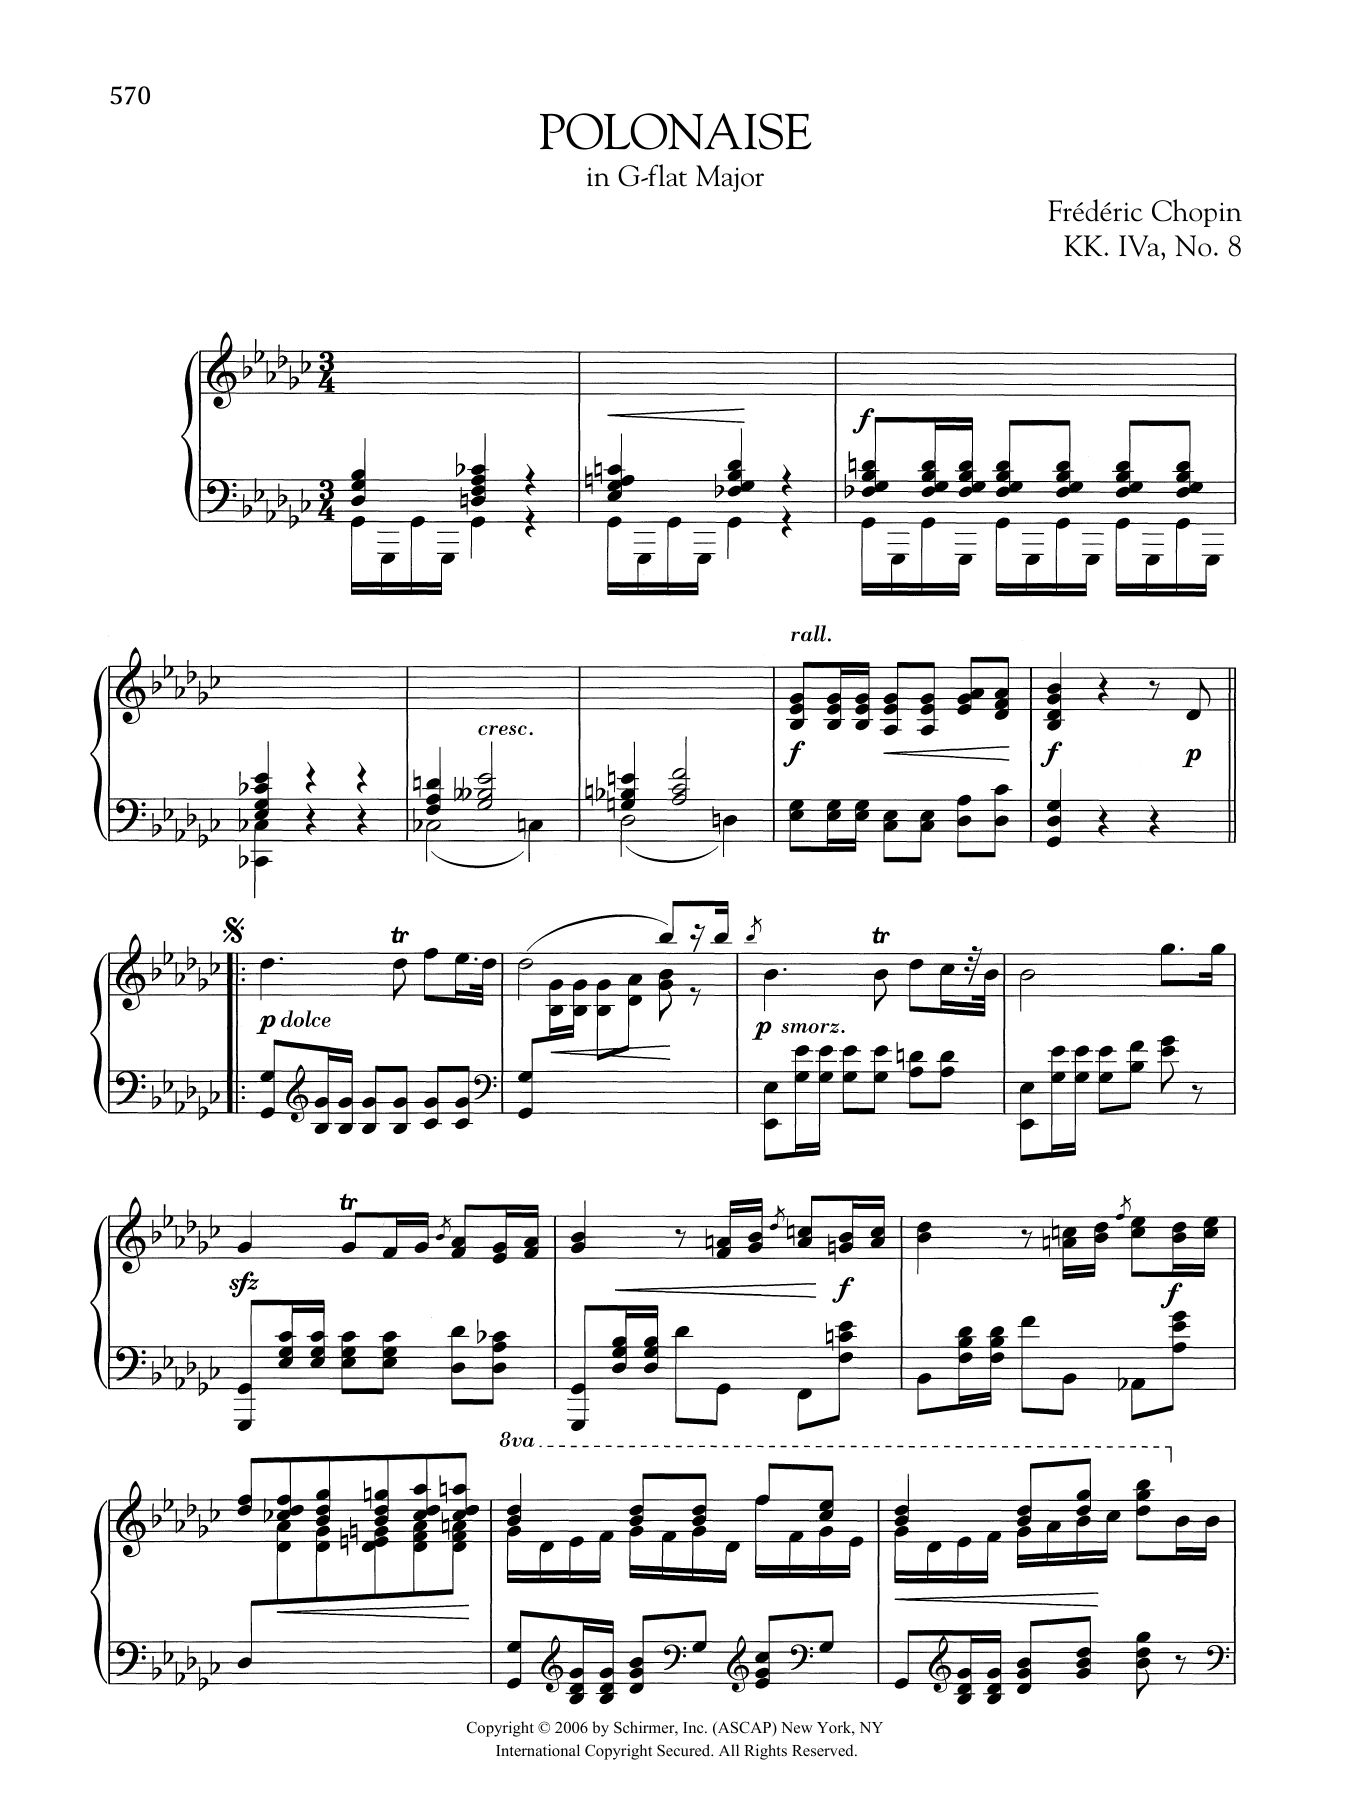 Download Frederic Chopin Polonaise in G-flat Major, KK. IVa, No. Sheet Music